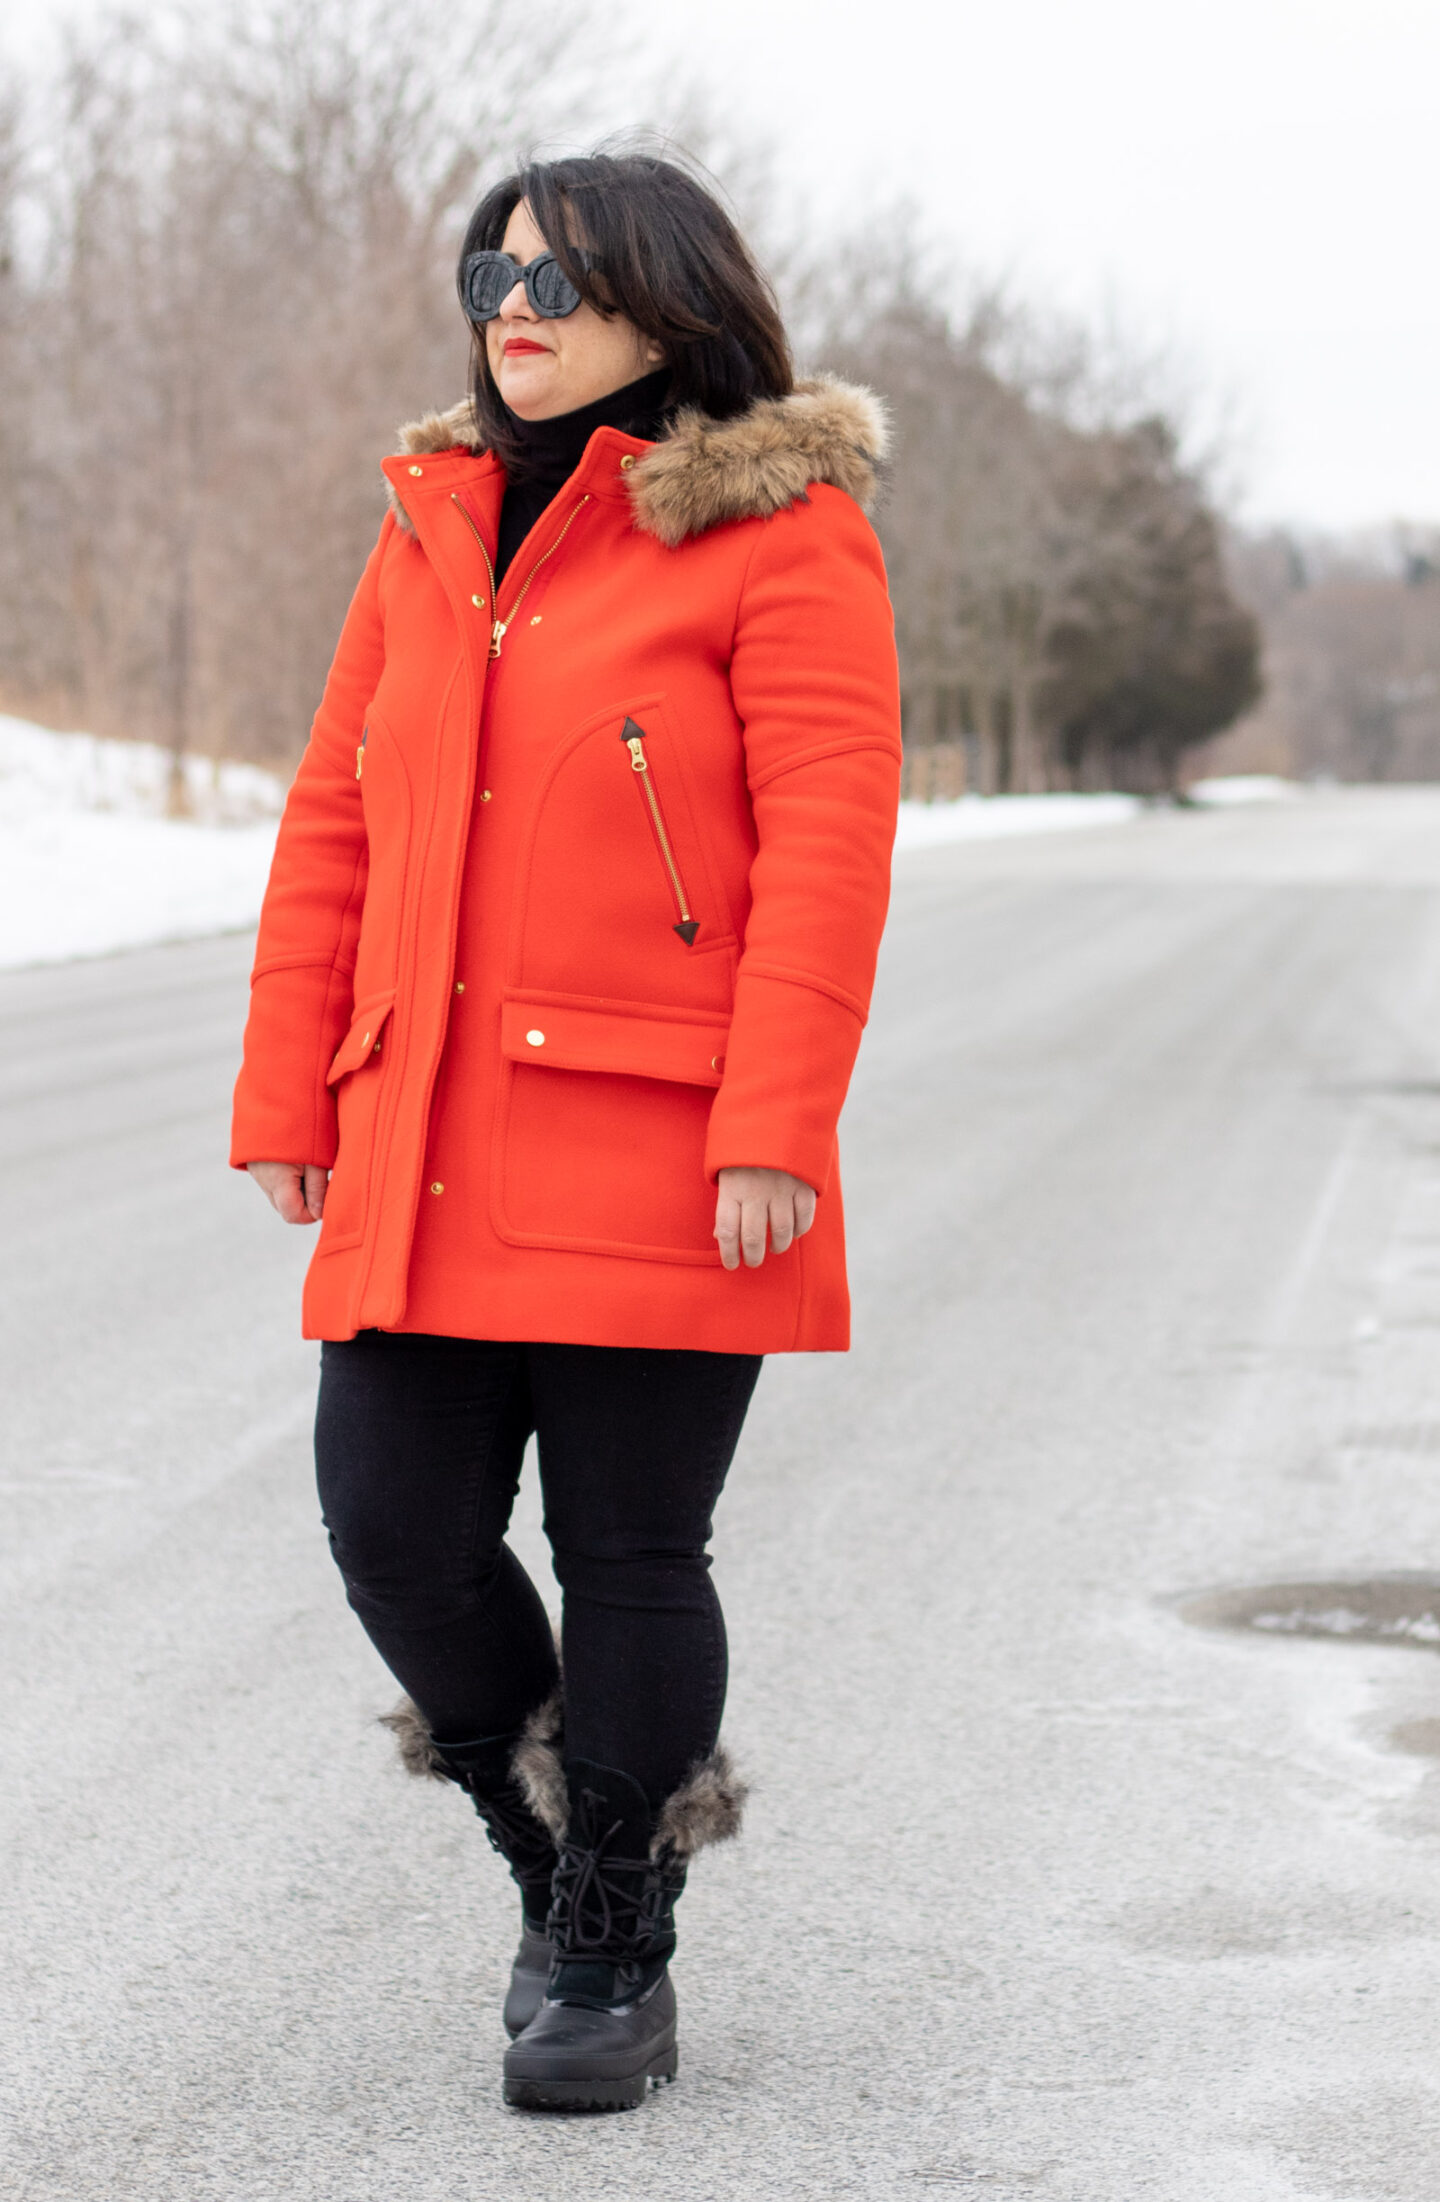 red and black winter outfit, jcrew chateau parka